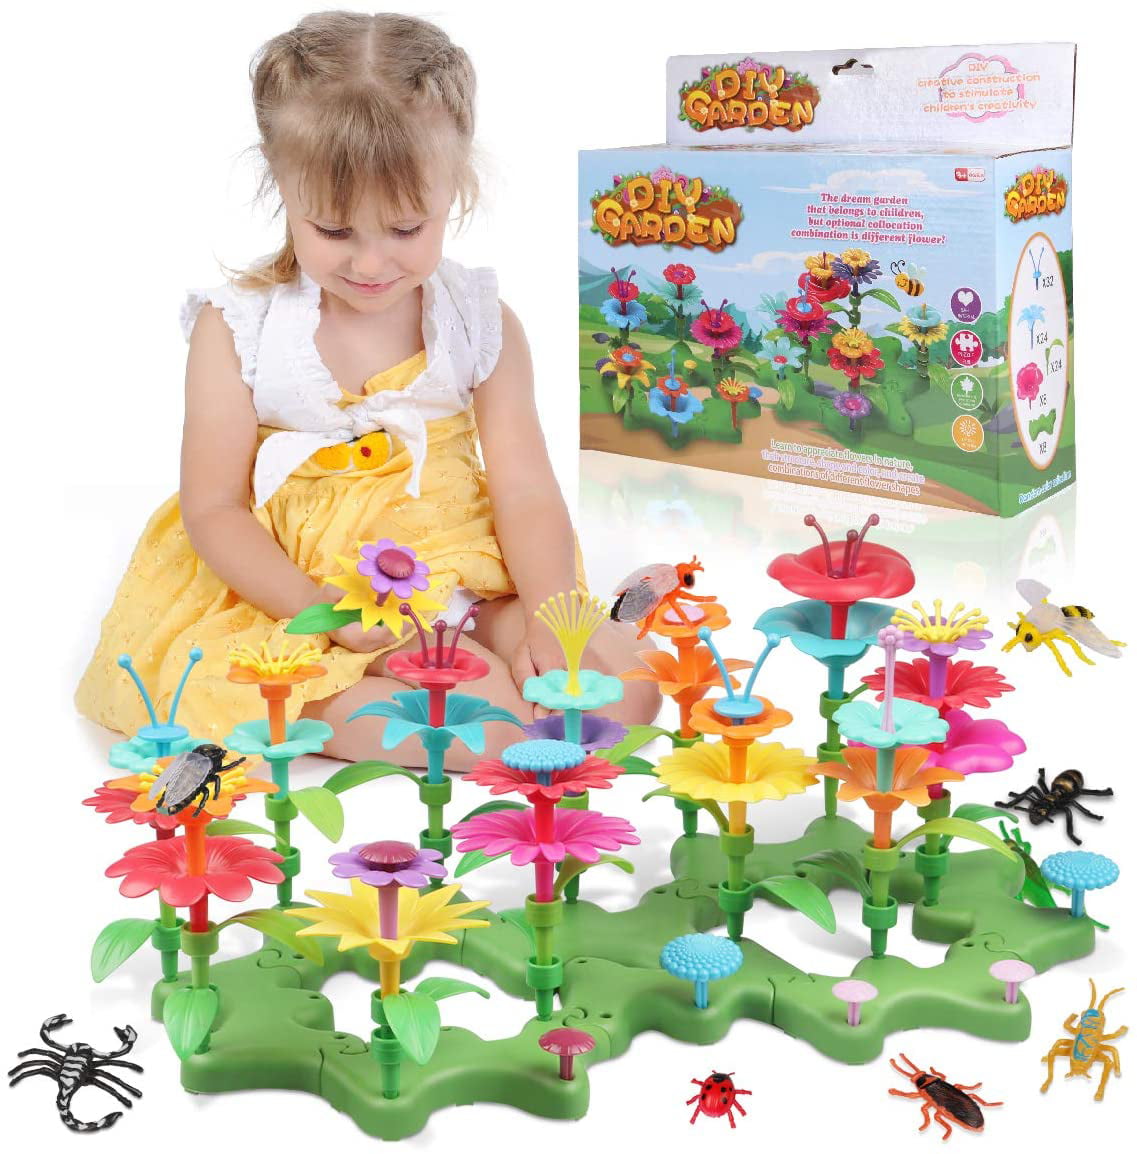 Girls Toys Flower Garden Building Toys for 3 4 5 6 Years Old Girls and Boys Toddlers Kids Gifts for 3 Years Old Birthday Christmas Building Block Toys for Indoor &Outdoor Education Stem Toys-96PCS 